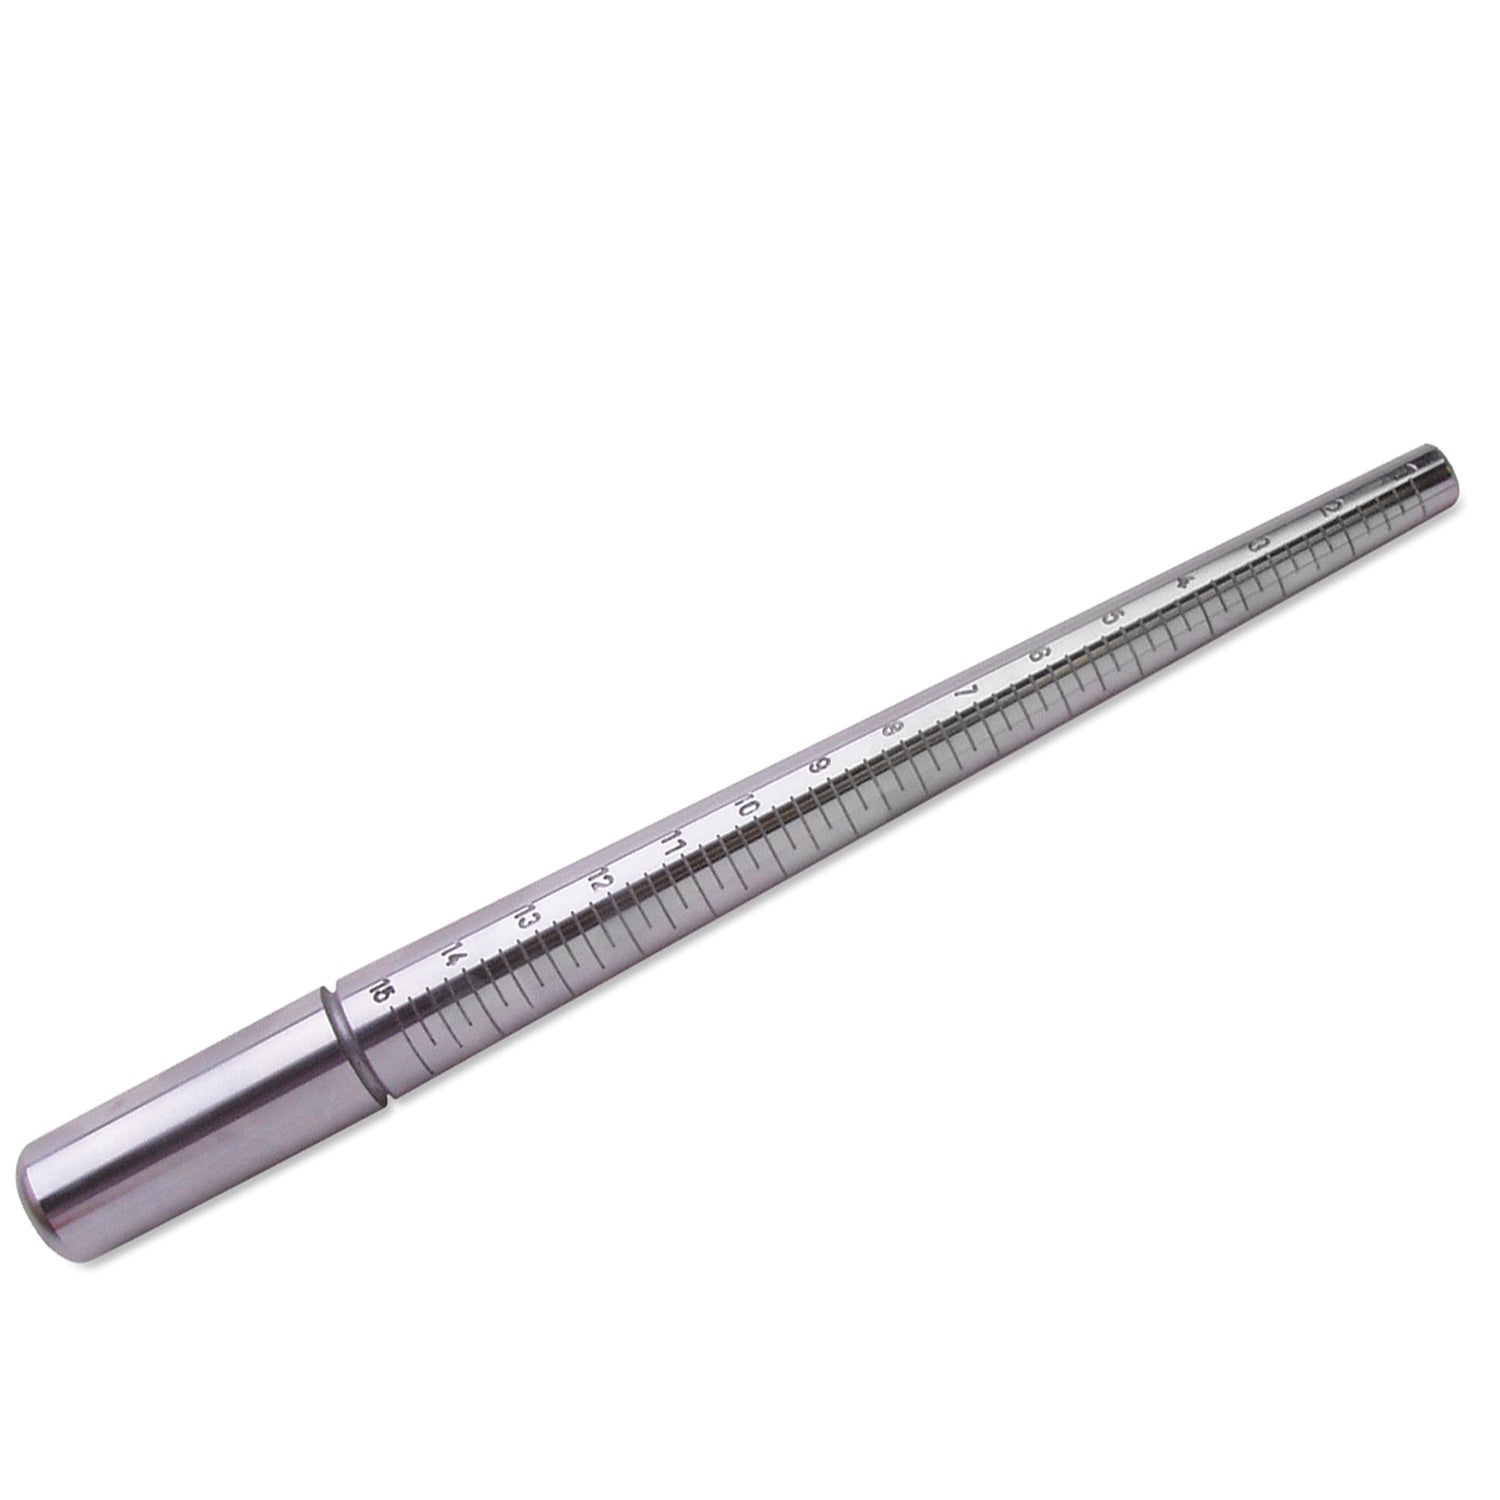 Wapiti Designs Expanding Stainless Steel Ring Mandrel for Ring